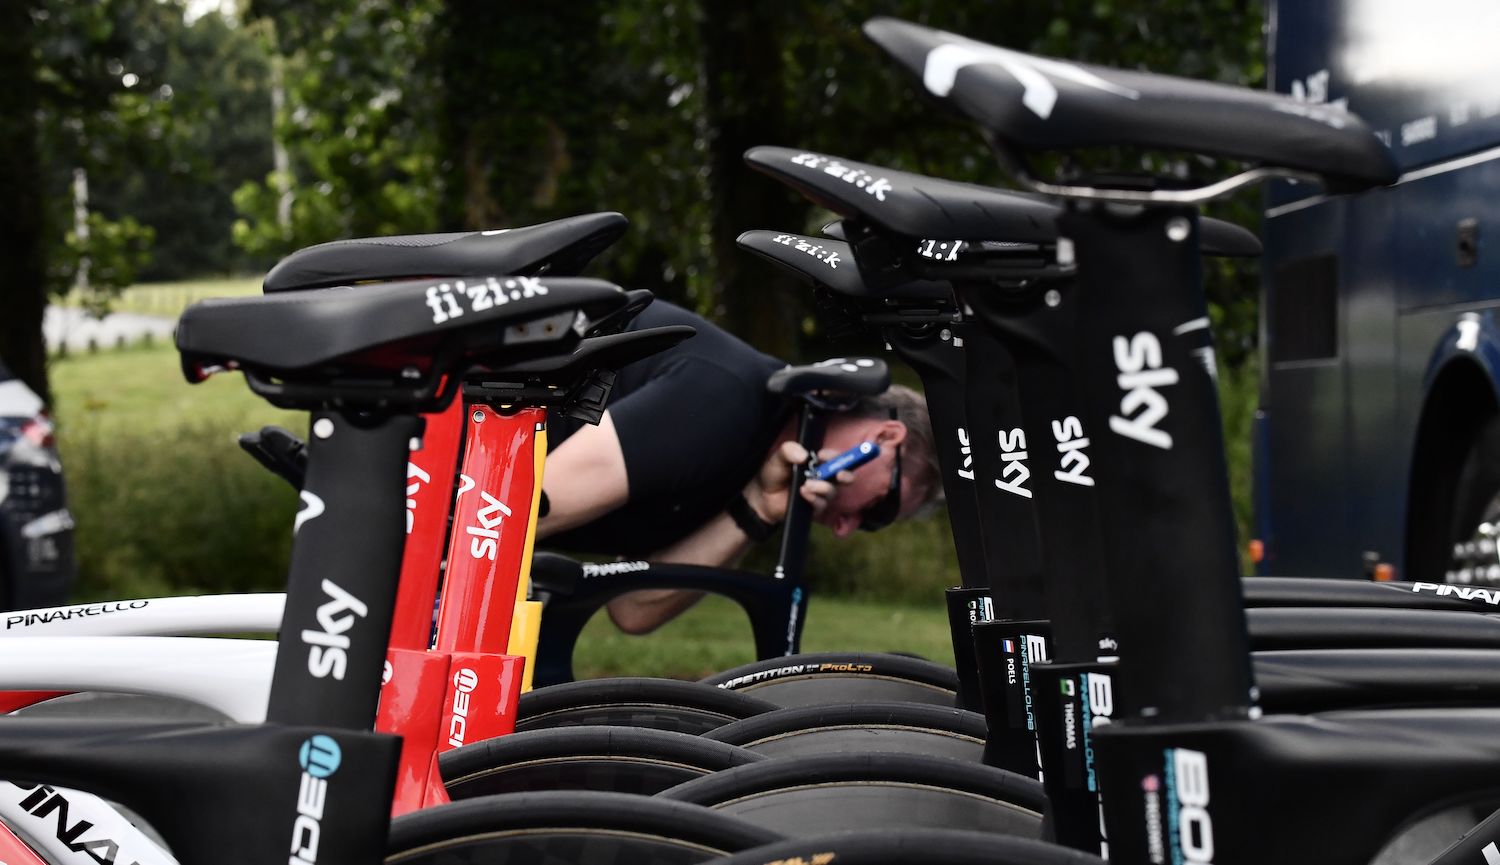 A mechanic prepares the bicycles of Team Sky cycling team prior to a training session on July 4, 2018 in Saint-Mars-la-Reorthe, western France, three days prior to the start of the 105th edition of the Tour de France cycling race. (Photo by Jeff PACHOUD / AFP) (Photo credit should read JEFF PACHOUD/AFP via Getty Images)